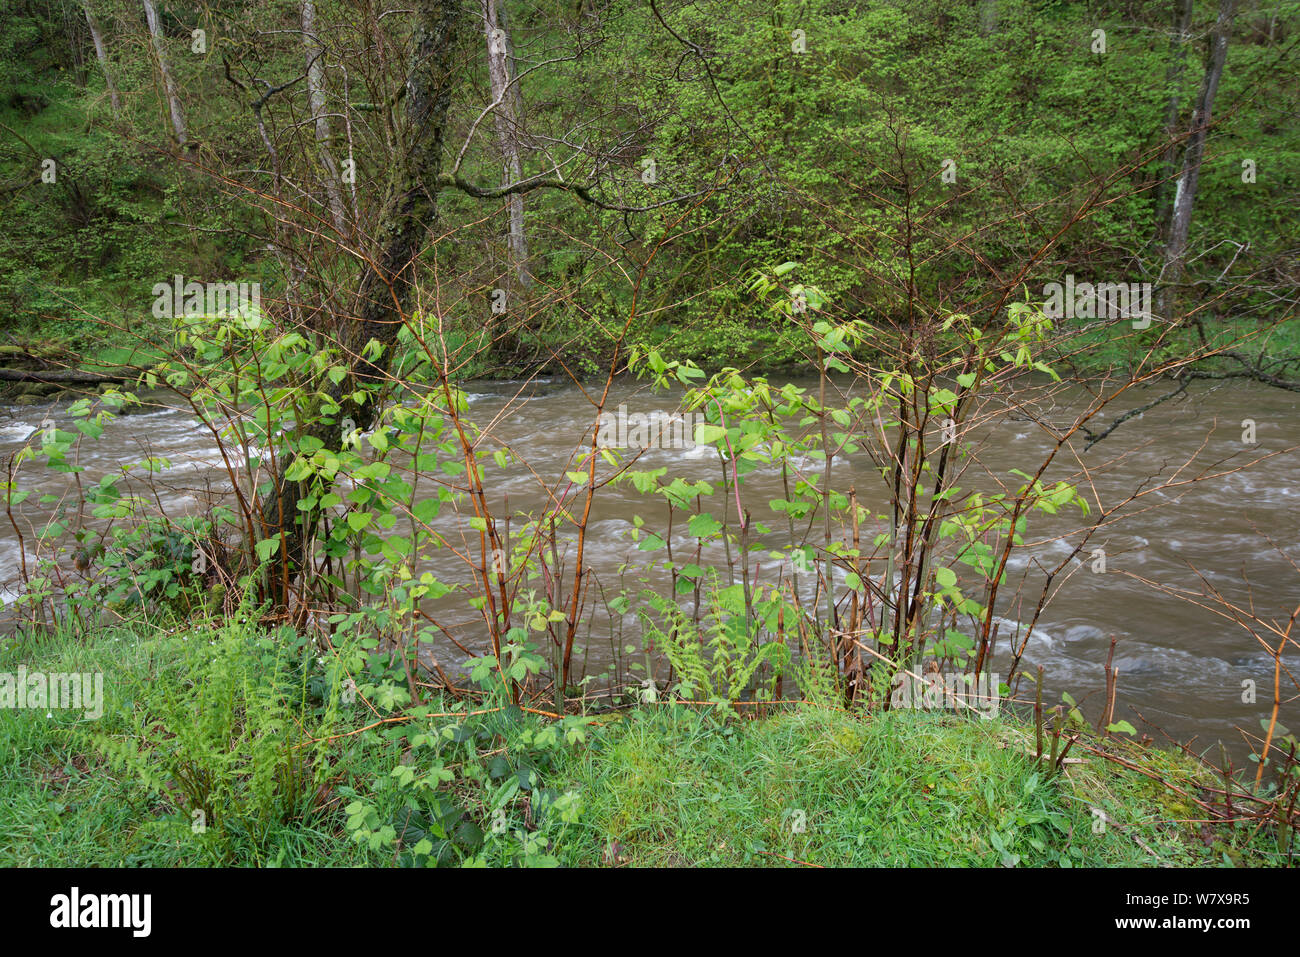 Japanese knotweed (Fallopia japonica) invasive species growing on banks of River Ifon, Powys, Wales, May. Stock Photo